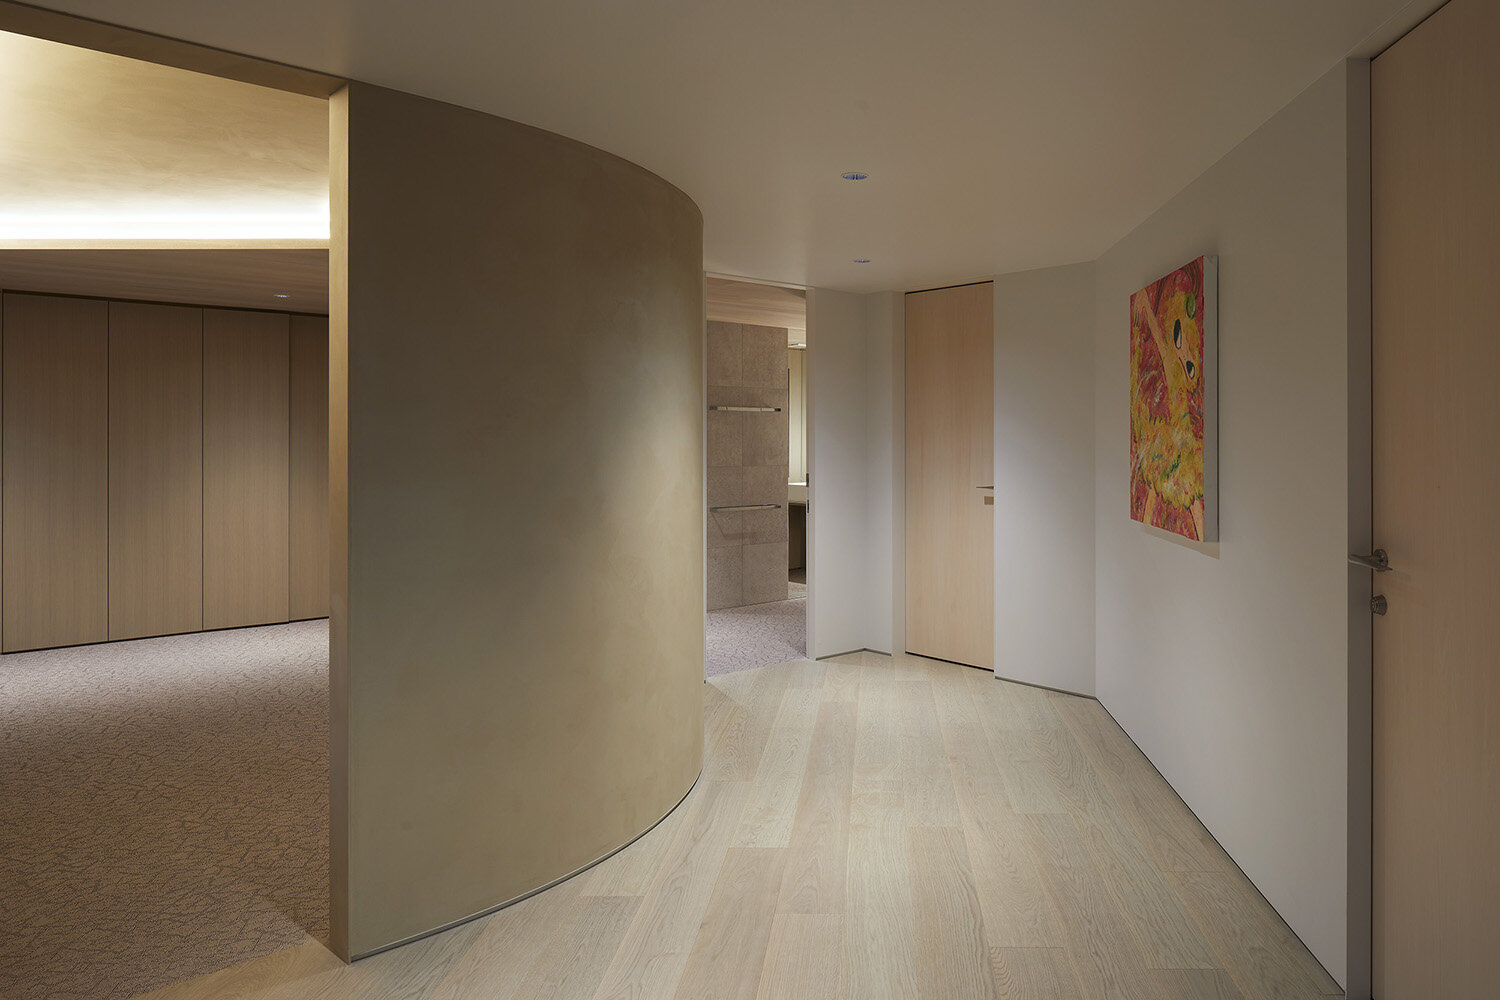  2nd floor interior of ‘Shoto S’, a residence designed by Japanese architecture design studio SINATO led by Chikara Ono. 